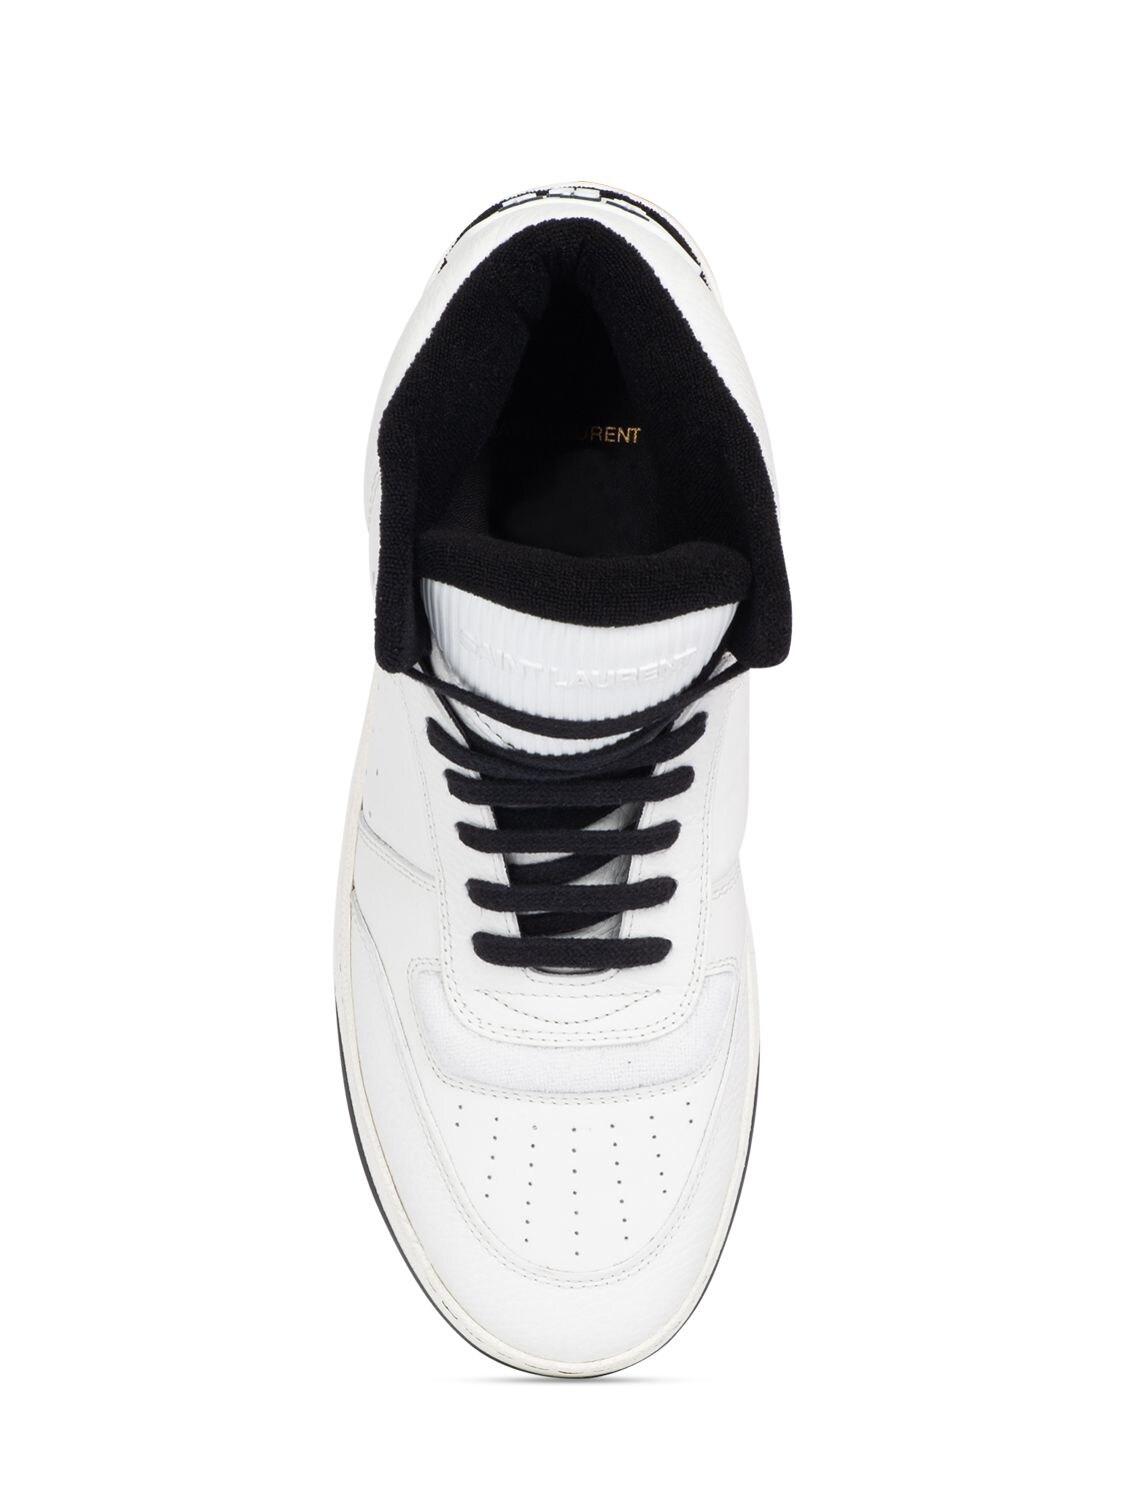 Shop Saint Laurent Sl/80 Leather Sneakers In Optic White